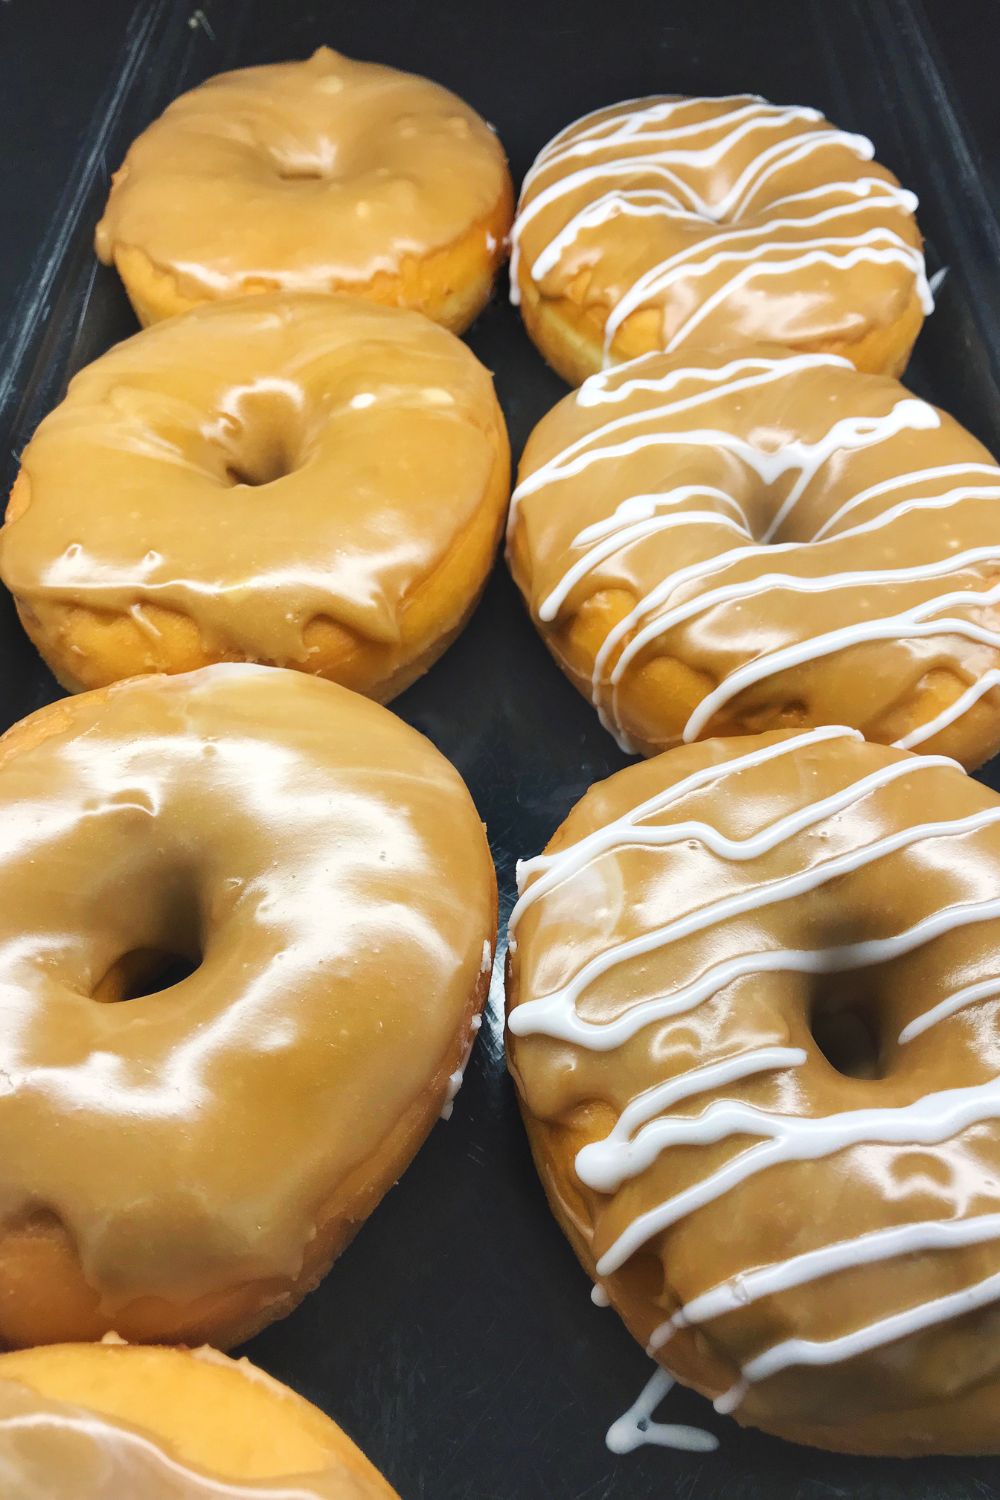 Why Do We Love Baked Glazed Donuts